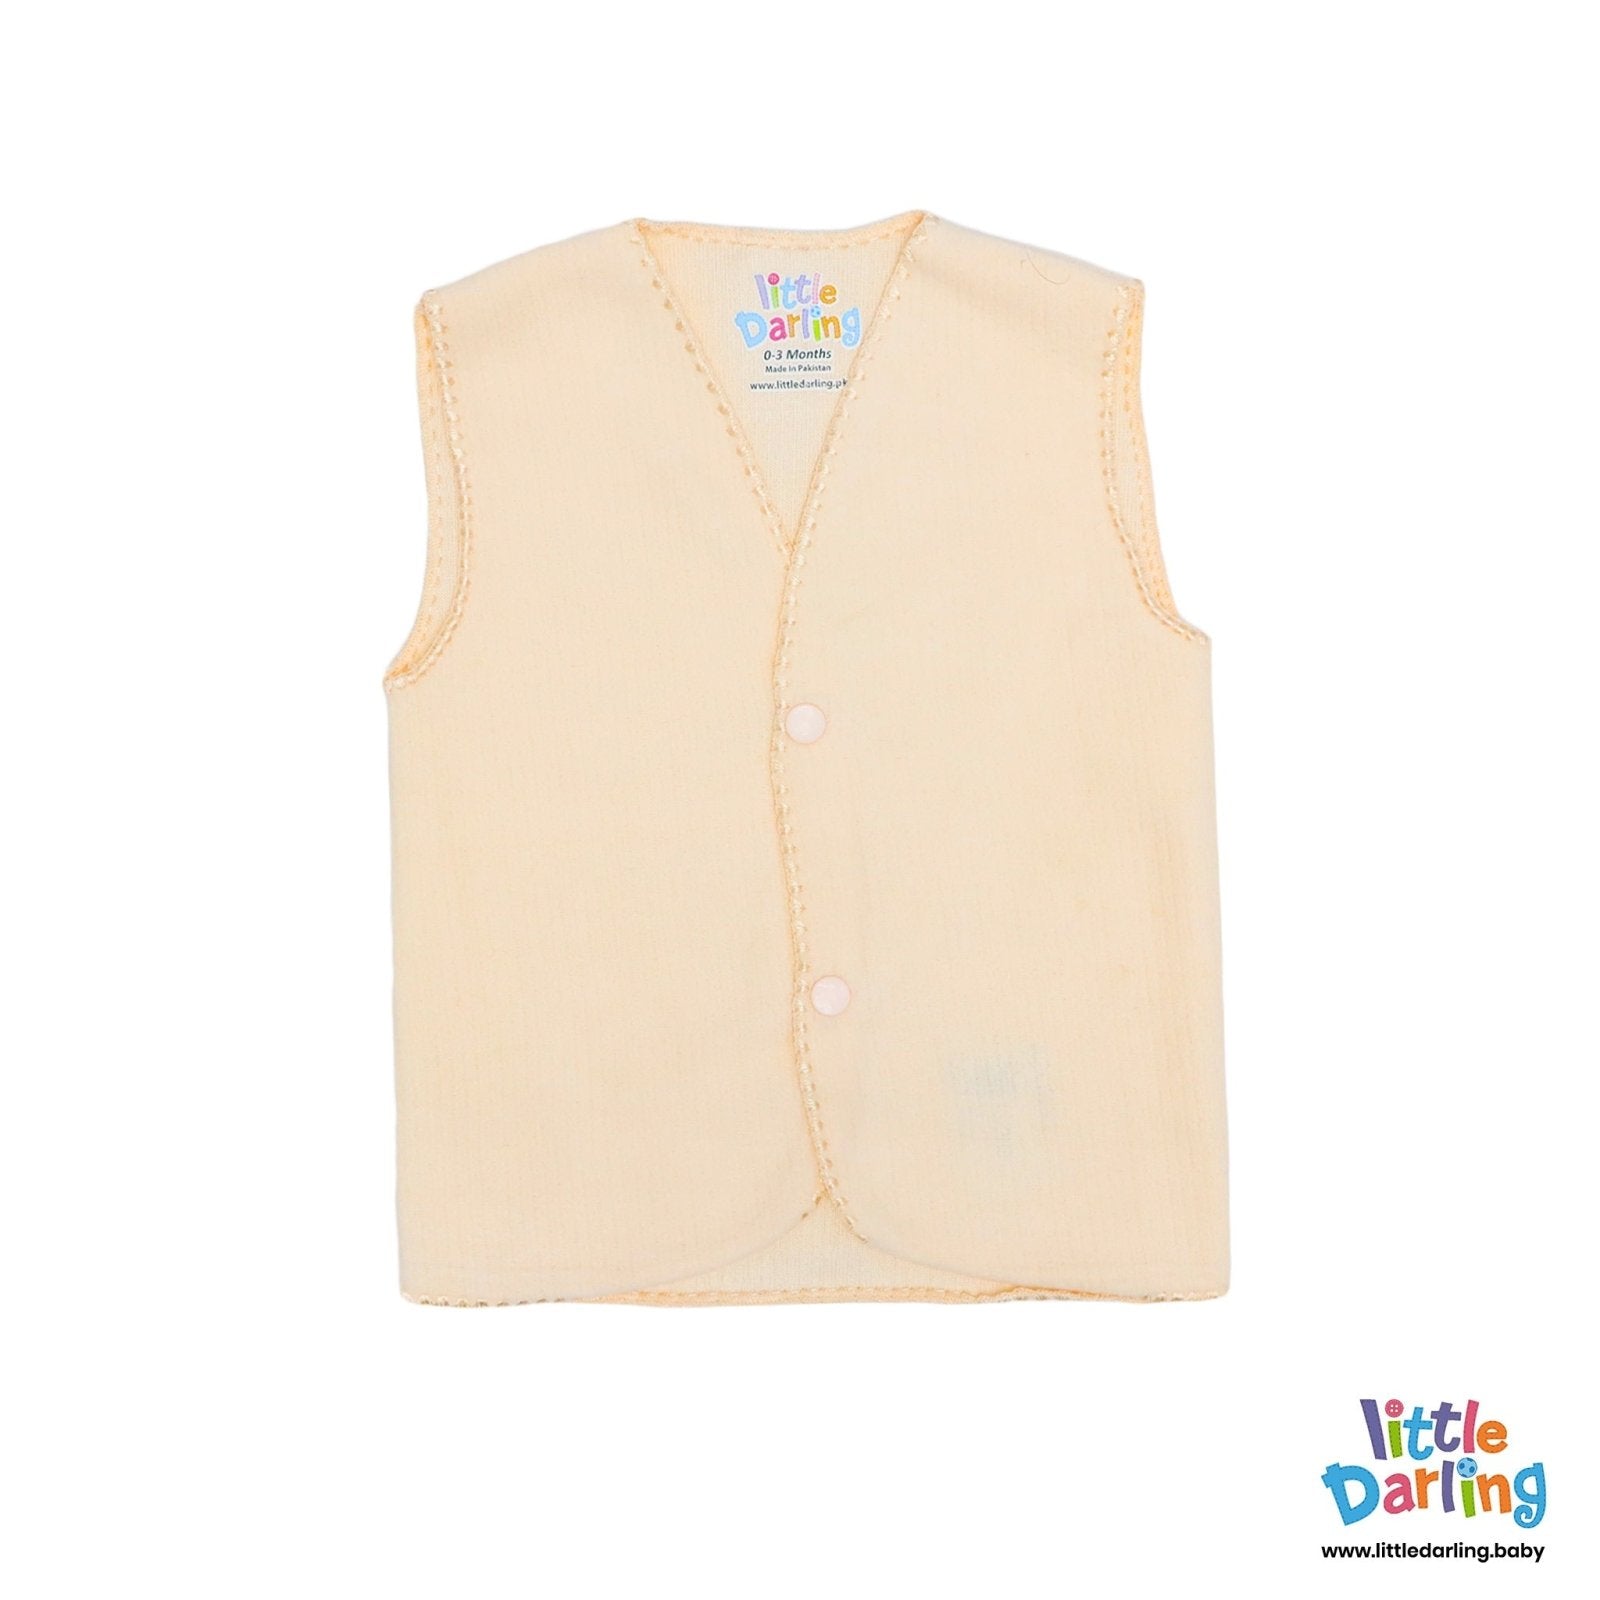 Pollar Vest Sleeveless Peach Color by Little Darling